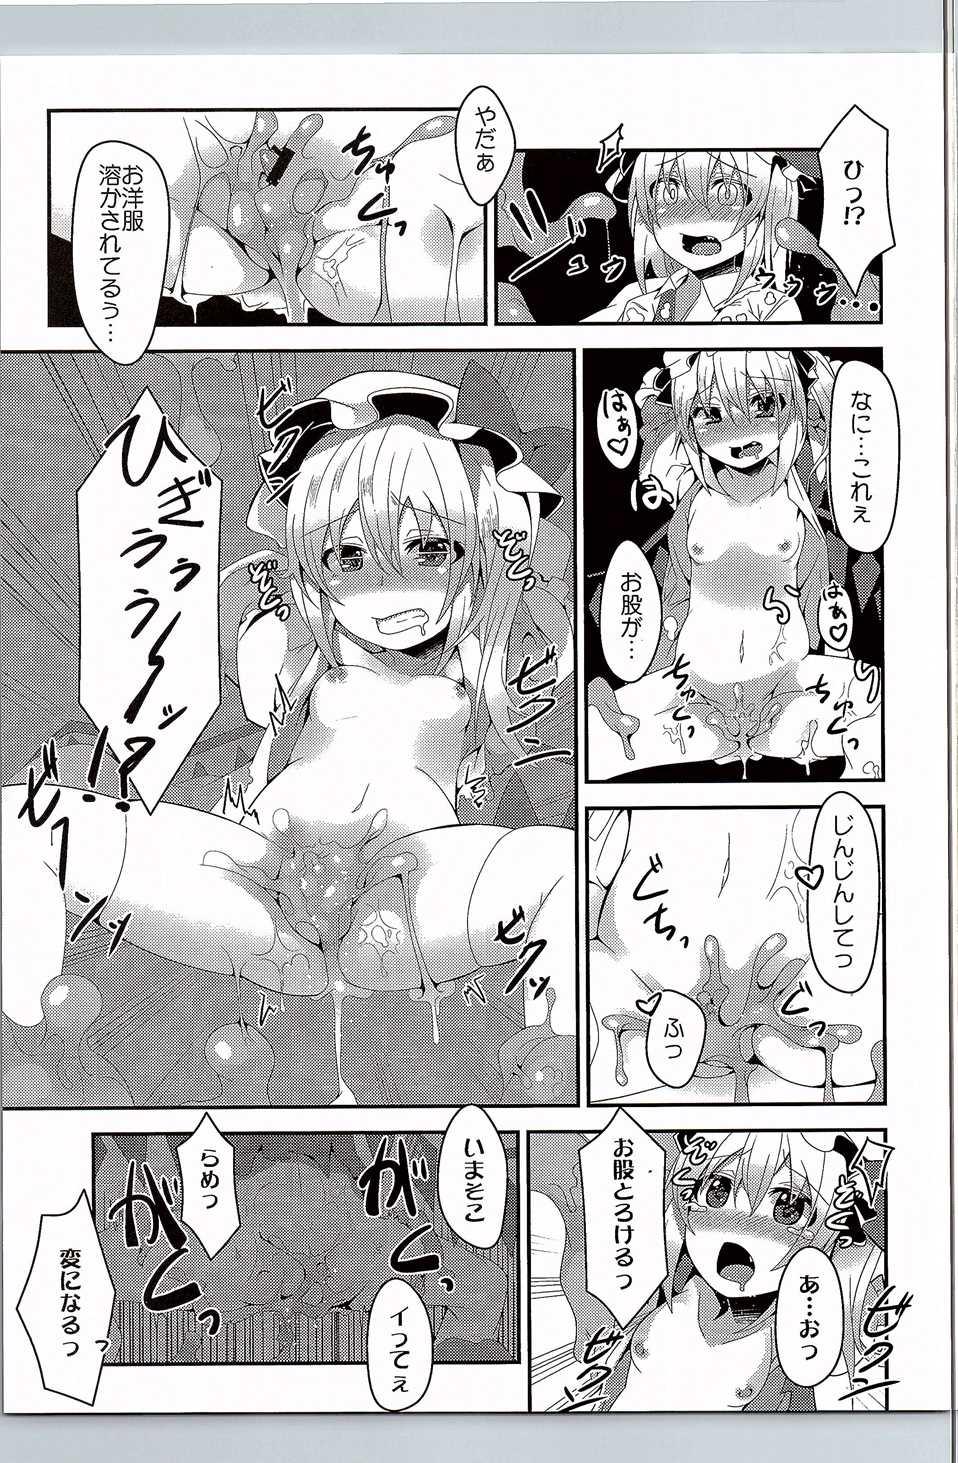 Granny Flan-chan no Ero Trap Dungeon - Touhou project Whipping - Page 6